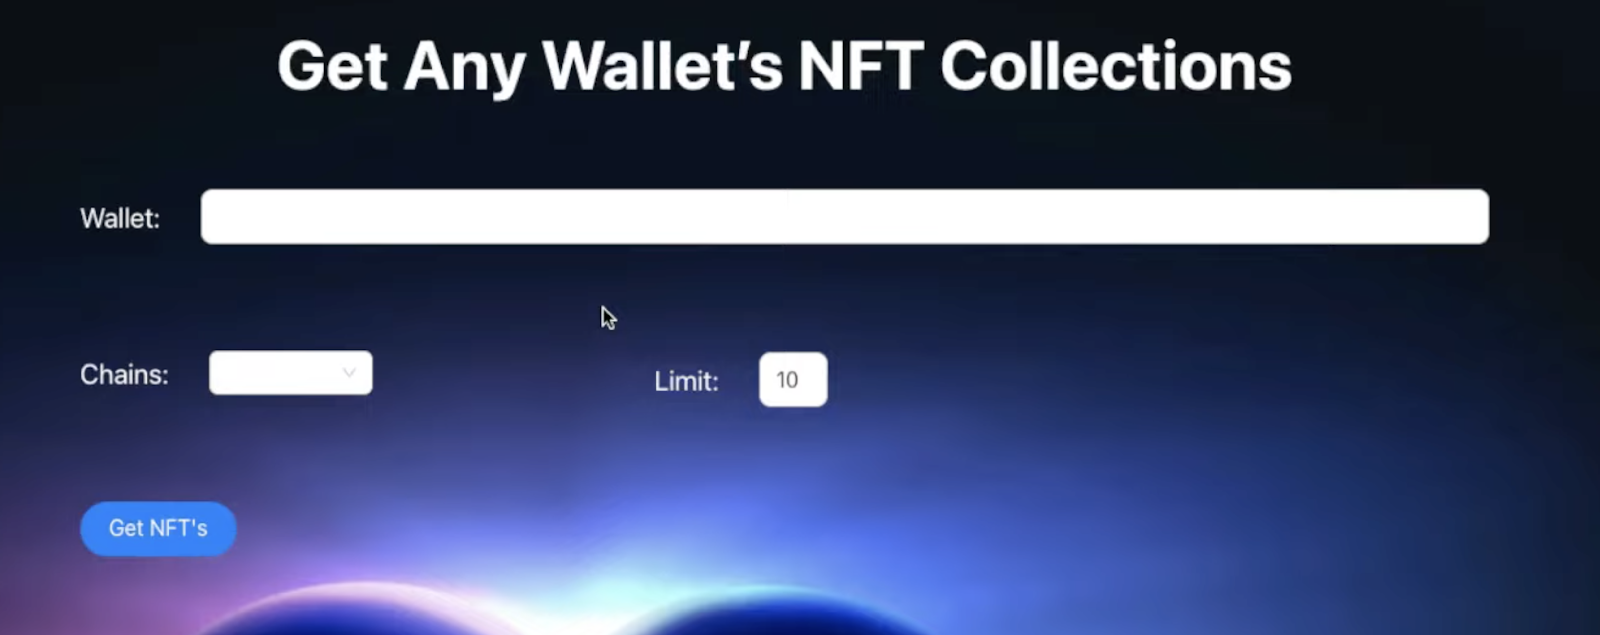 landing page of our get nft collections using python and react application